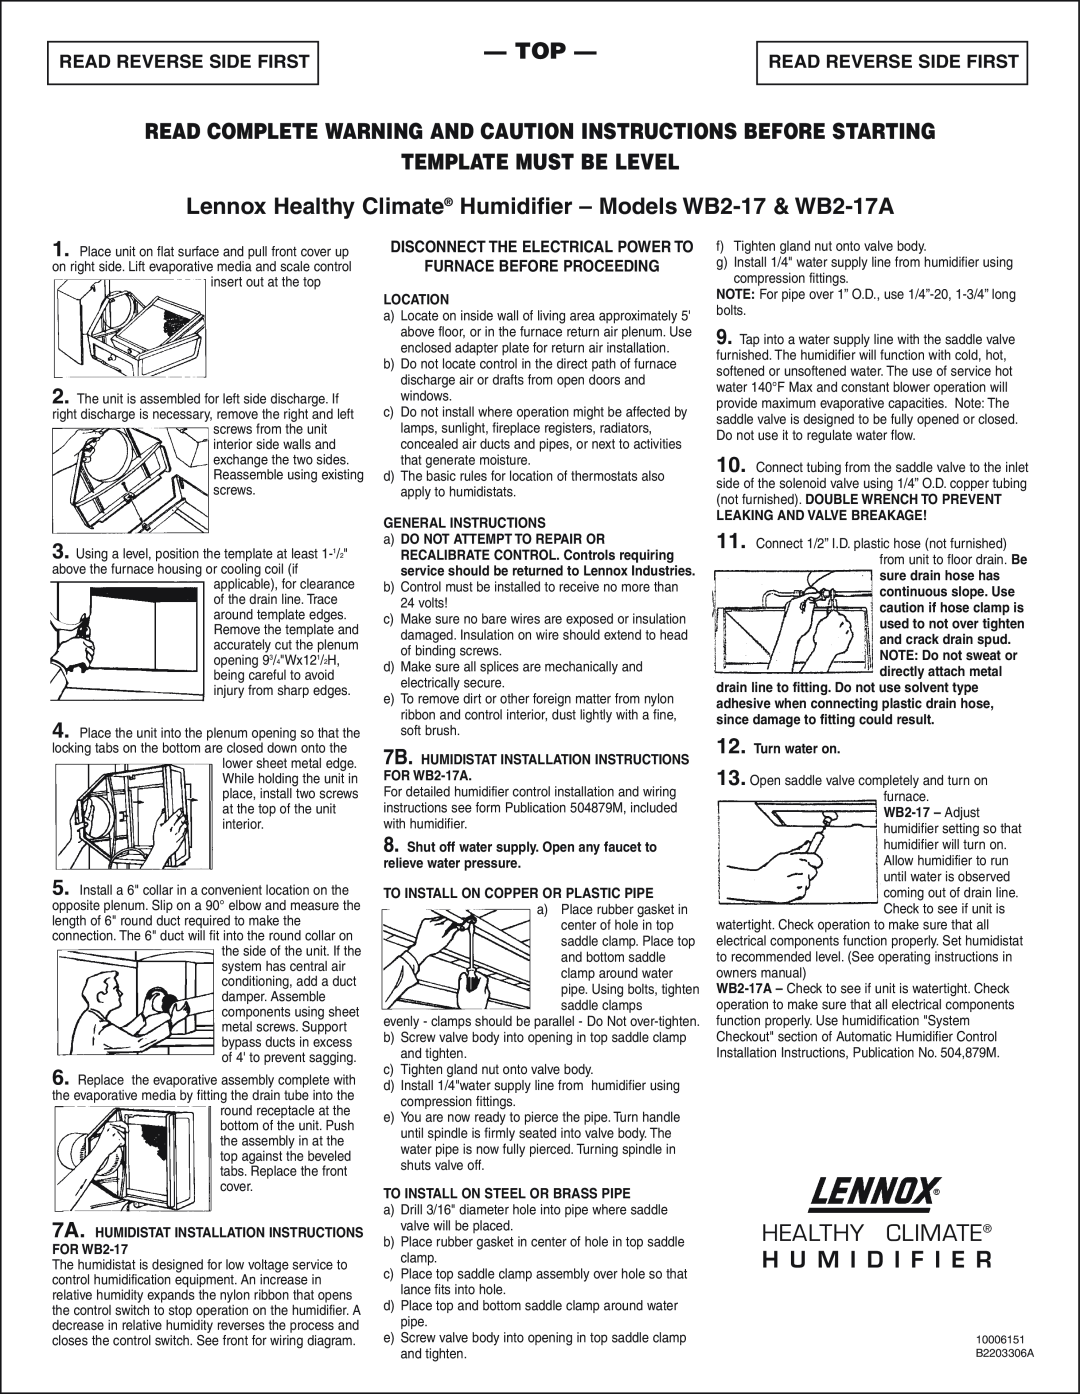 Lenox wb2-17a Top, Template Must Be Level, Healthy Climate H U M I D I F I E R, Read Reverse Side First 